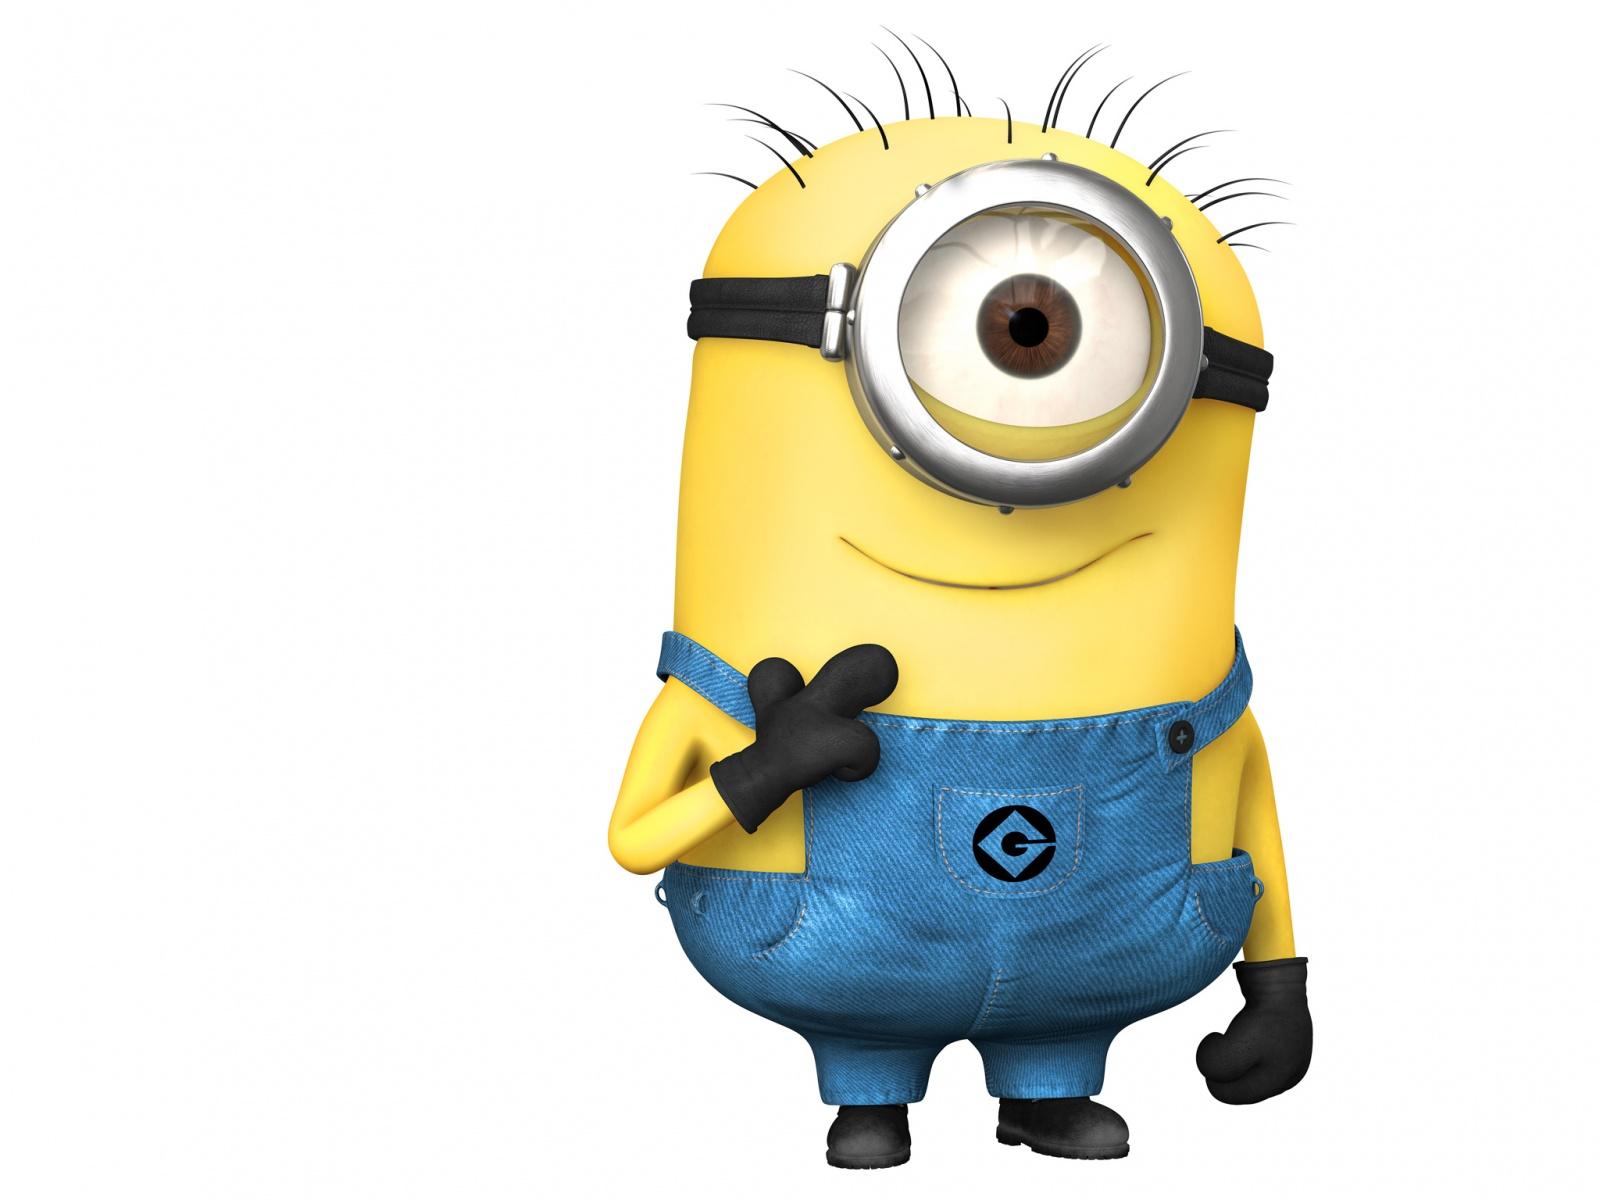 kevin the minion wallpaper (77+ images) on kevin the minion wallpapers